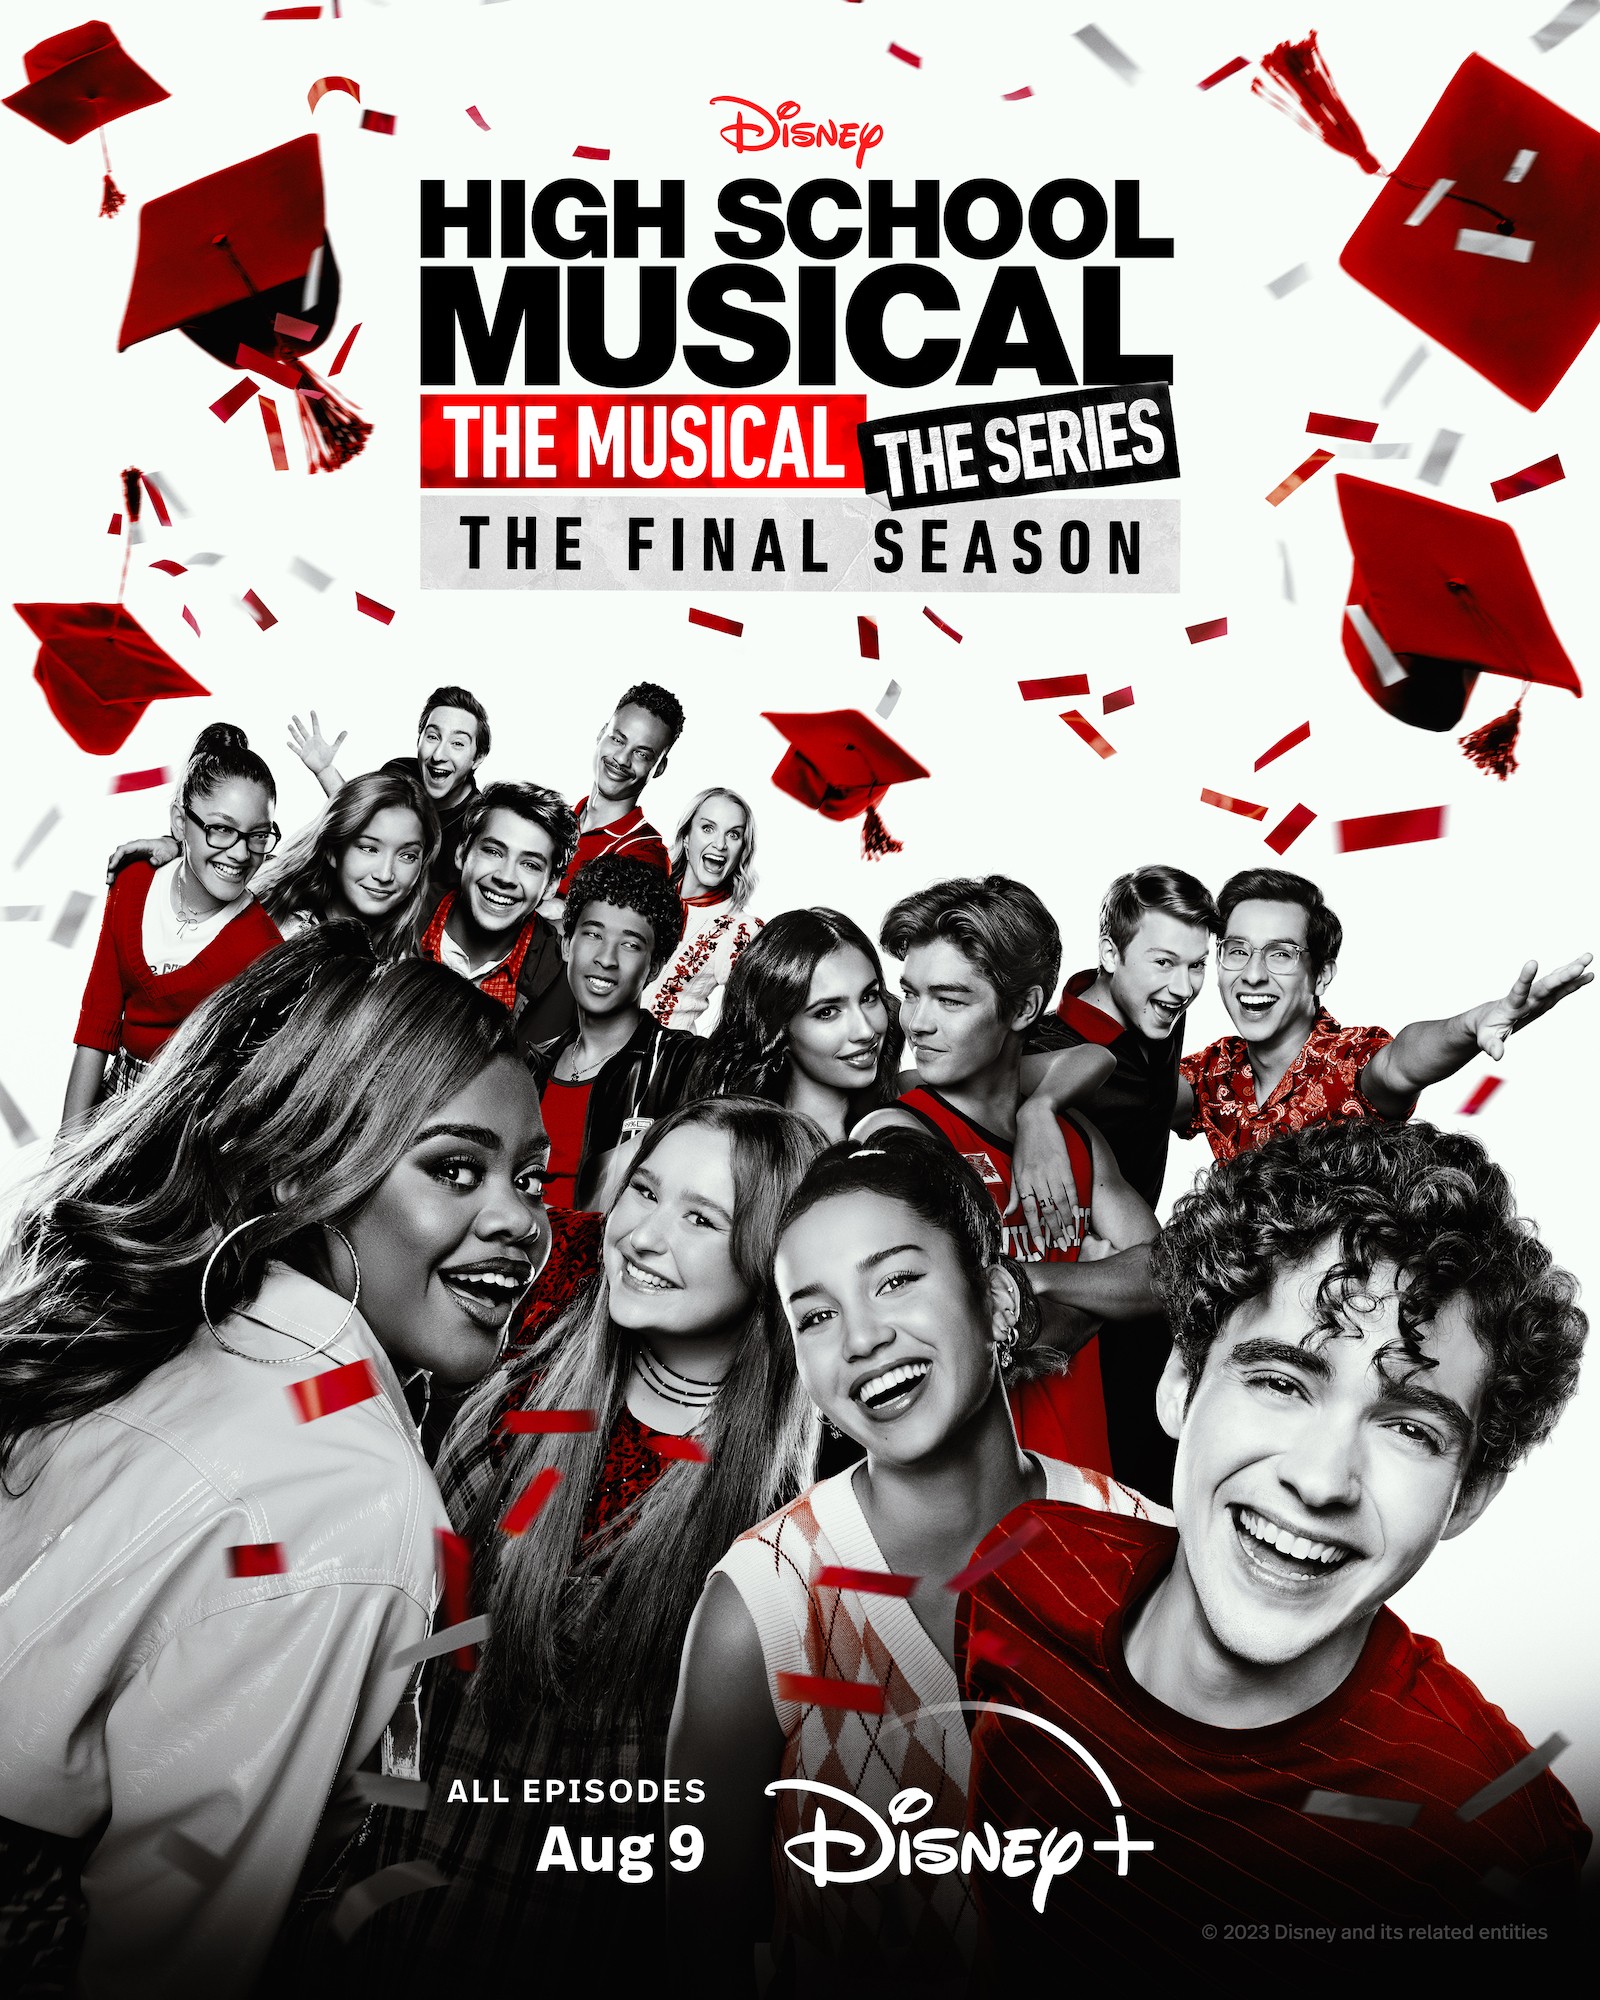 High School The Season Tomatoes Musical: Series 4 Rotten Musical: The 